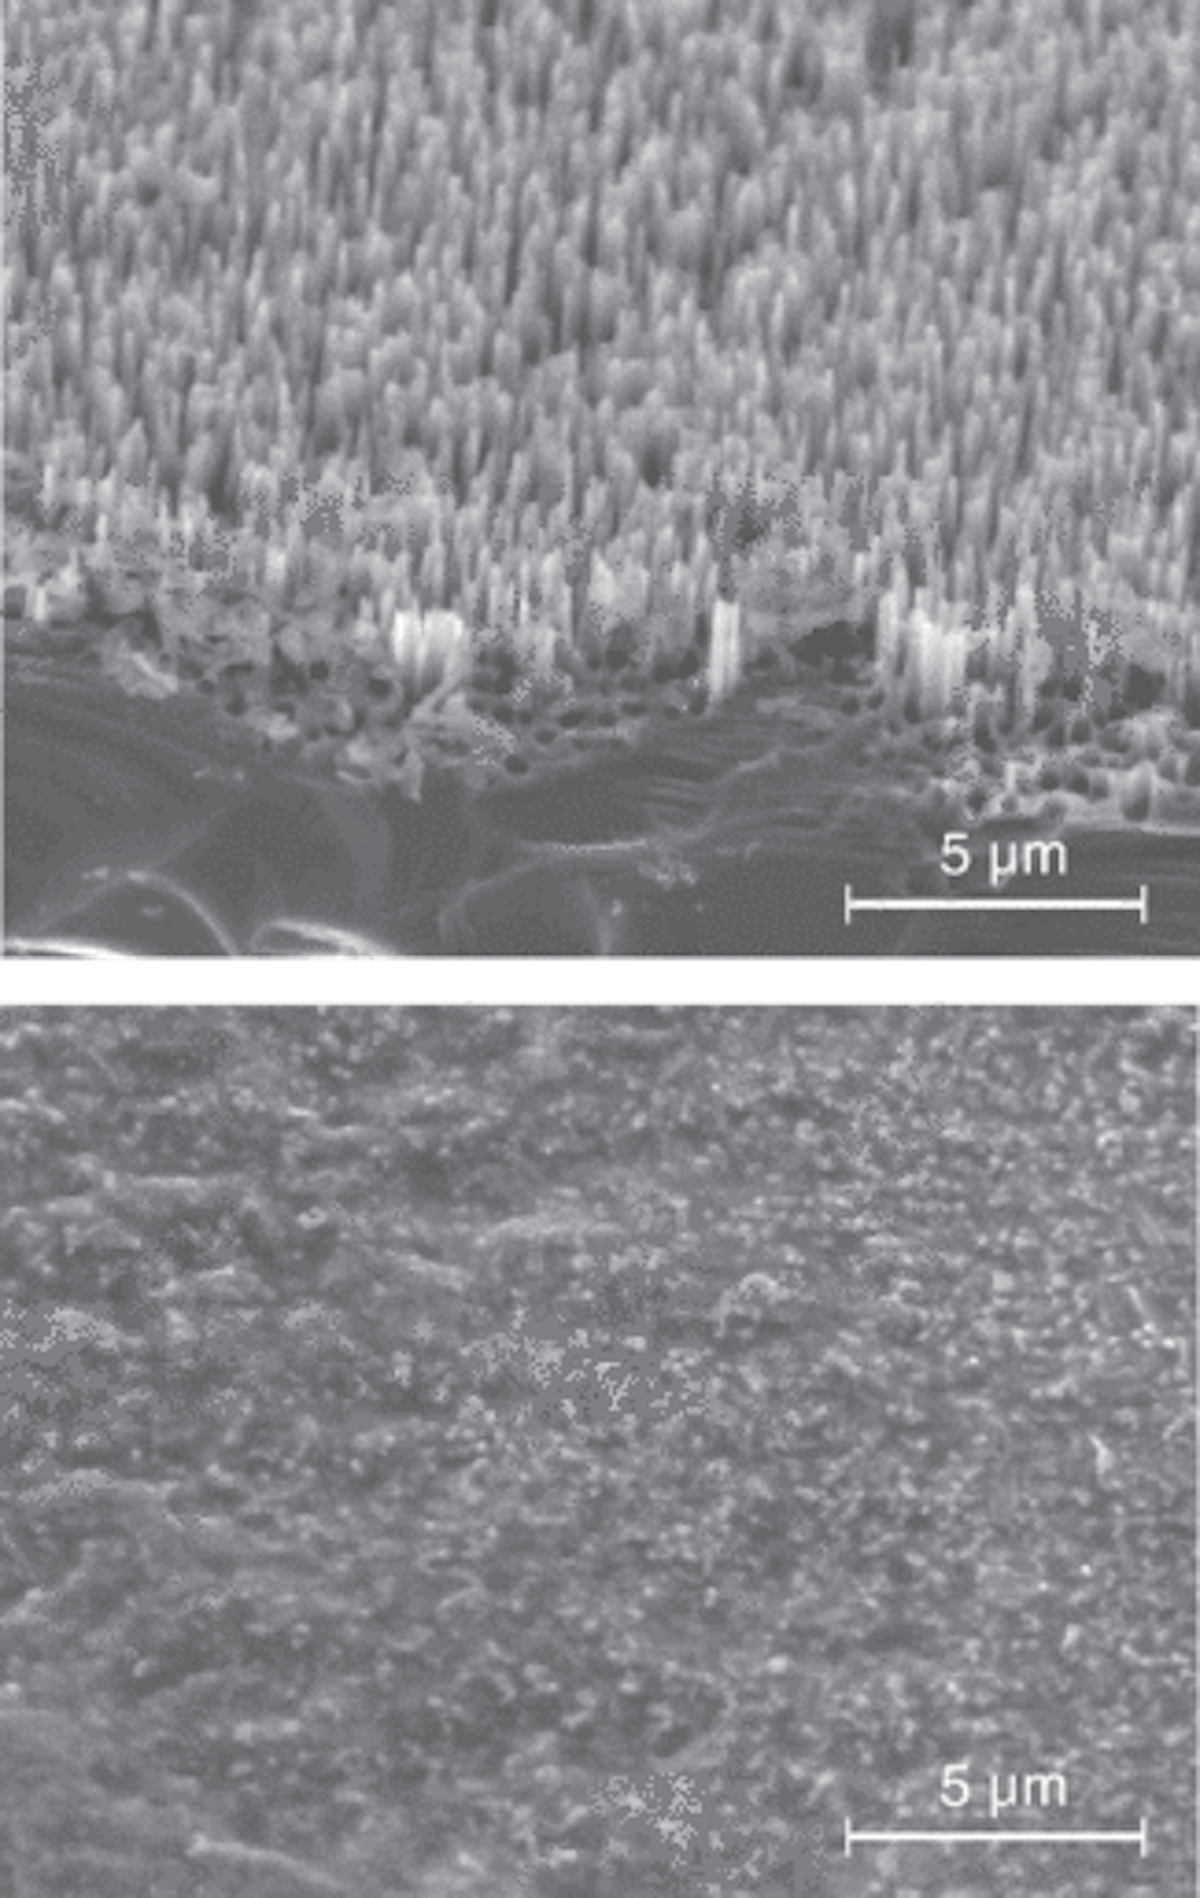 Black silicon consists of needle-shaped structures created on the surface of silicon through high-energy irradiation or chemical treatment (top); the absorptive structure can have many applications, including being used as a source of terahertz radiation. The silicon was intentionally damaged (bottom) to confirm that the needle structure was indeed the cause of terahertz emission.